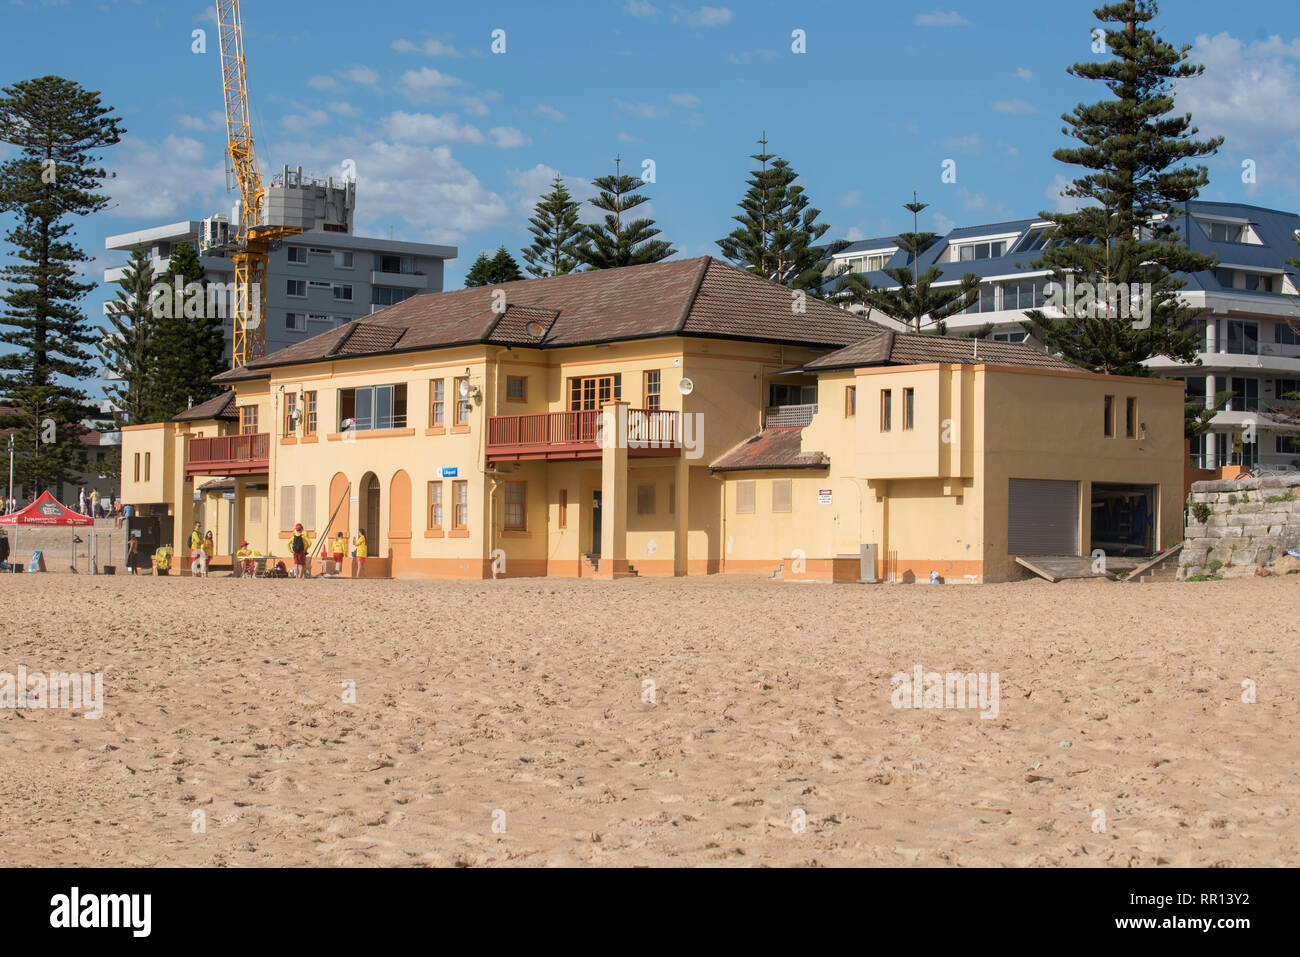 The South Steyne surf club house and Norfolk pines at Sydney's Manly Beach, New South Wales, Australia Stock Photo